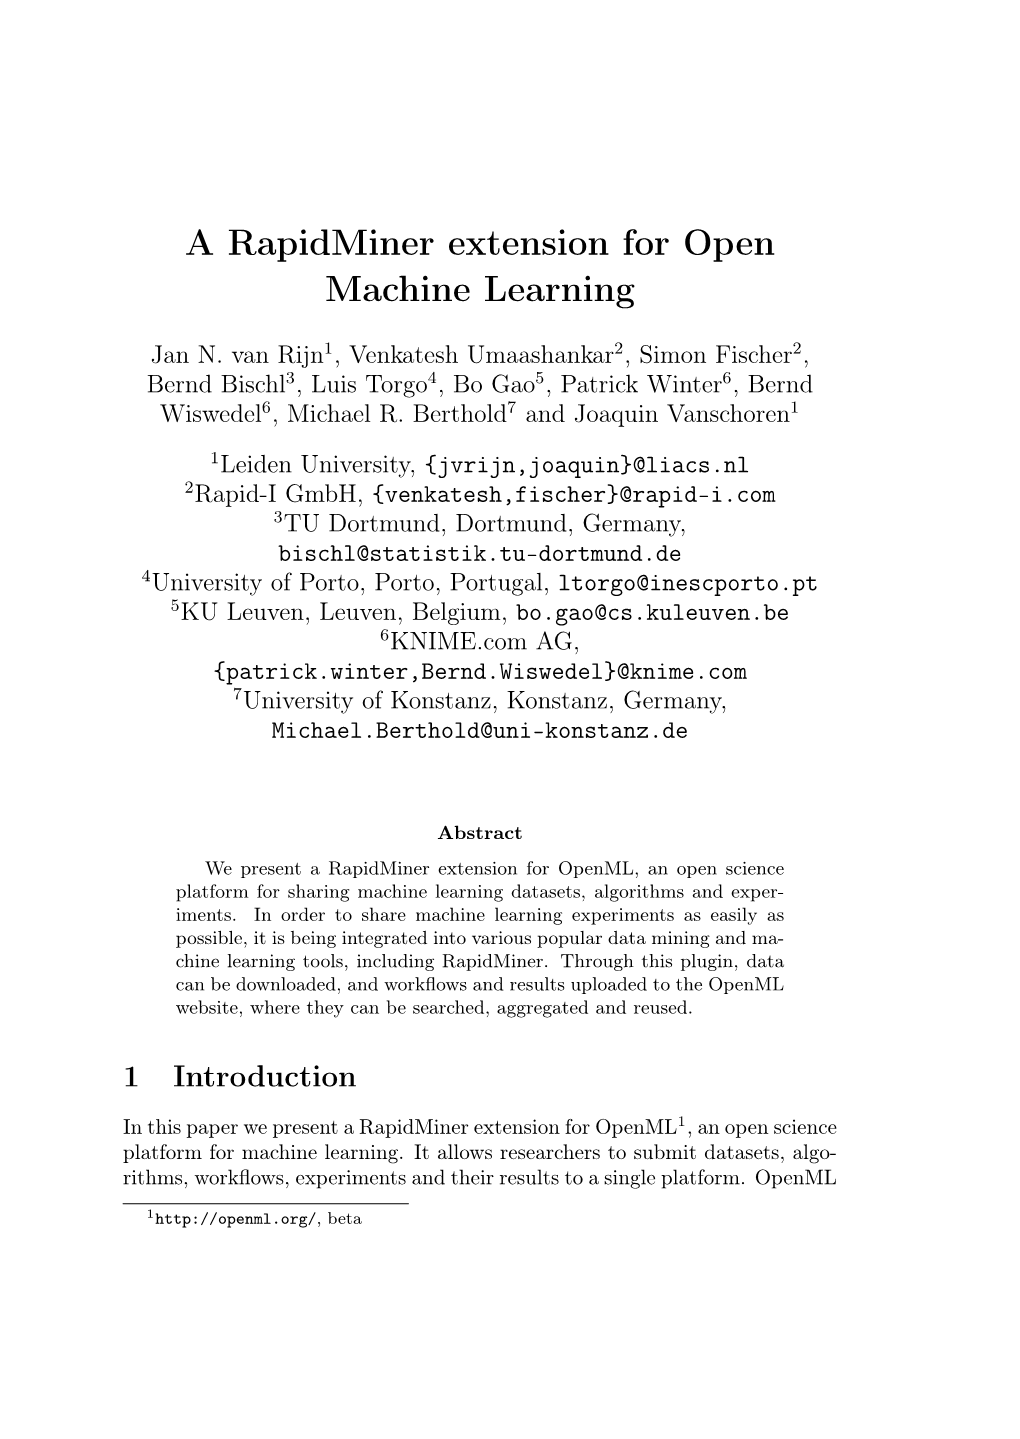 A Rapidminer Extension for Open Machine Learning